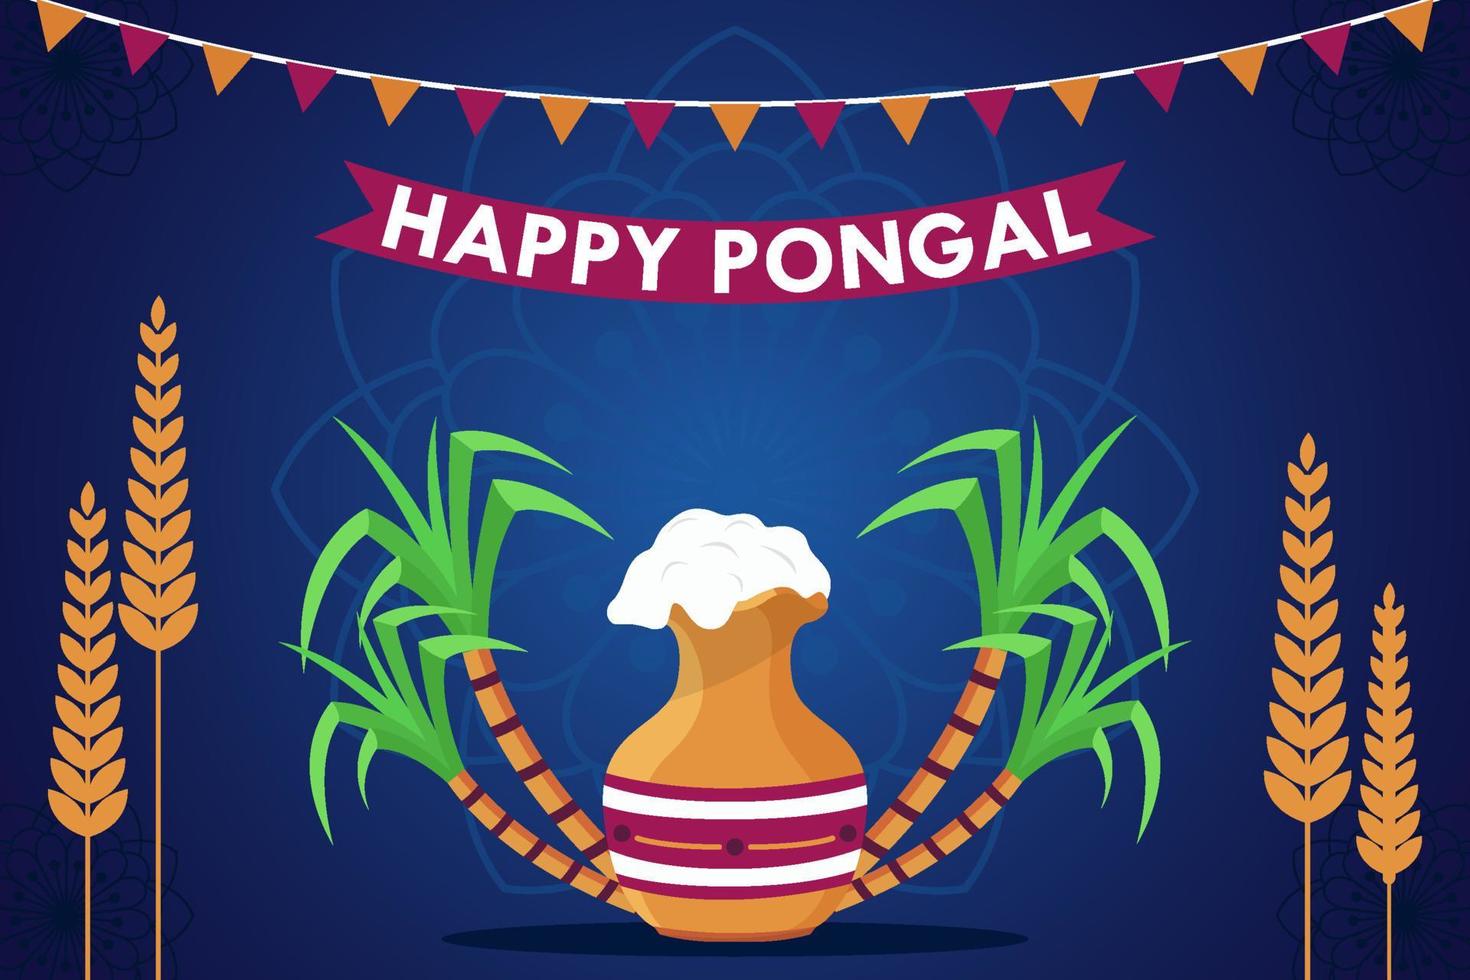 Happy Pongal Celebration Day Background vector